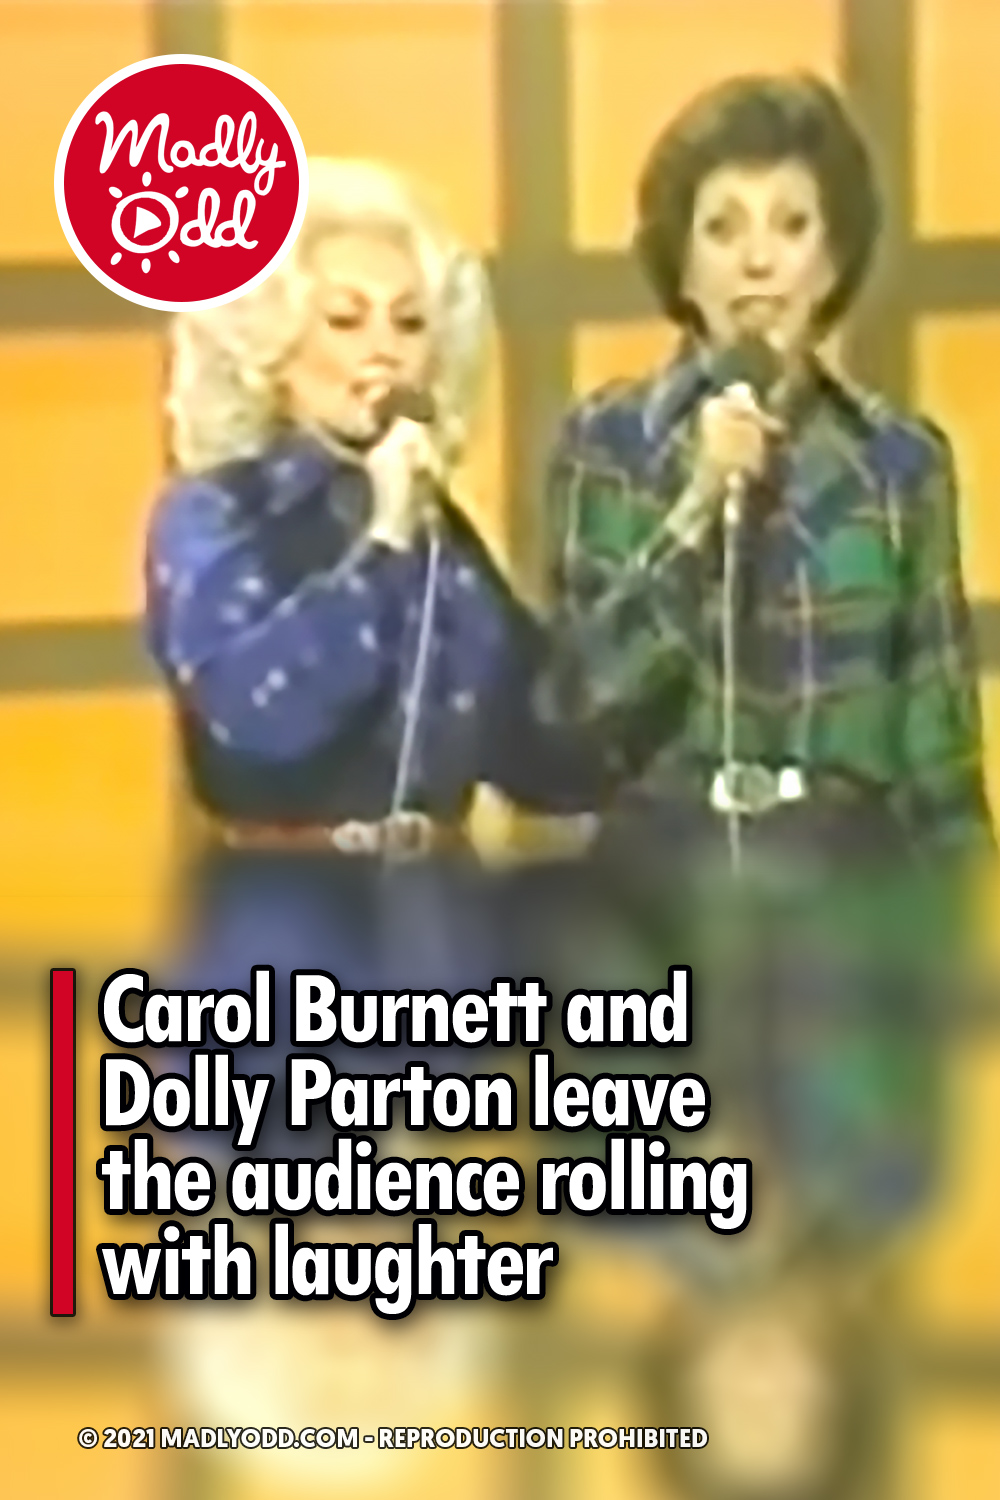 Carol Burnett and Dolly Parton leave the audience rolling with laughter